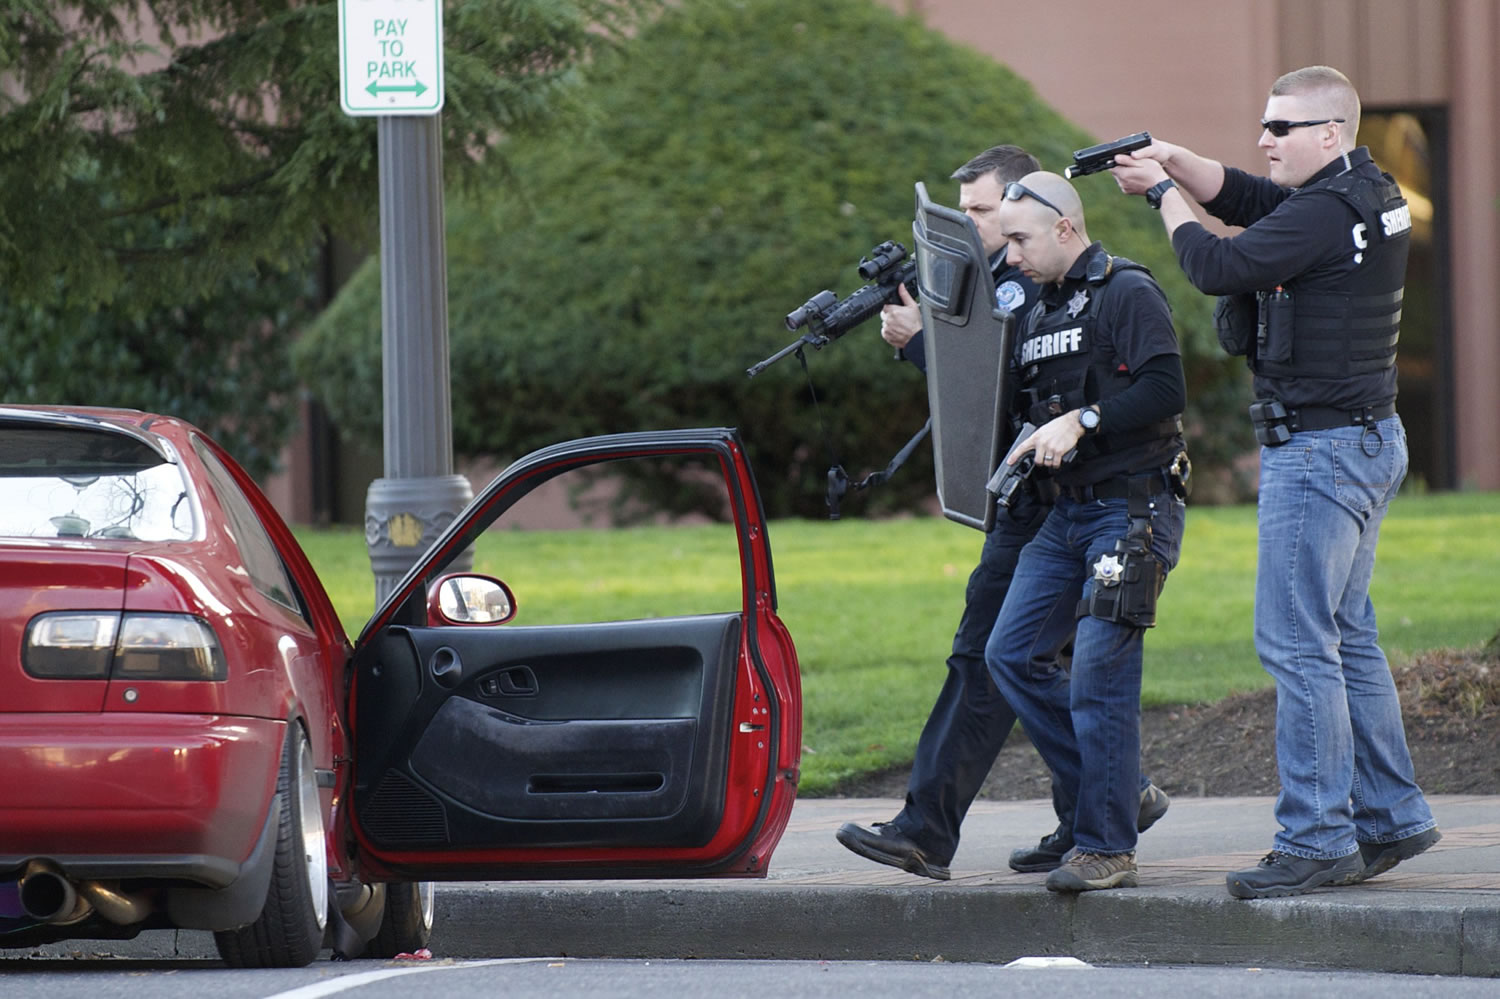 Police carefully approach a red car parked in front of the Clark County Courthouse on Friday afternoon.